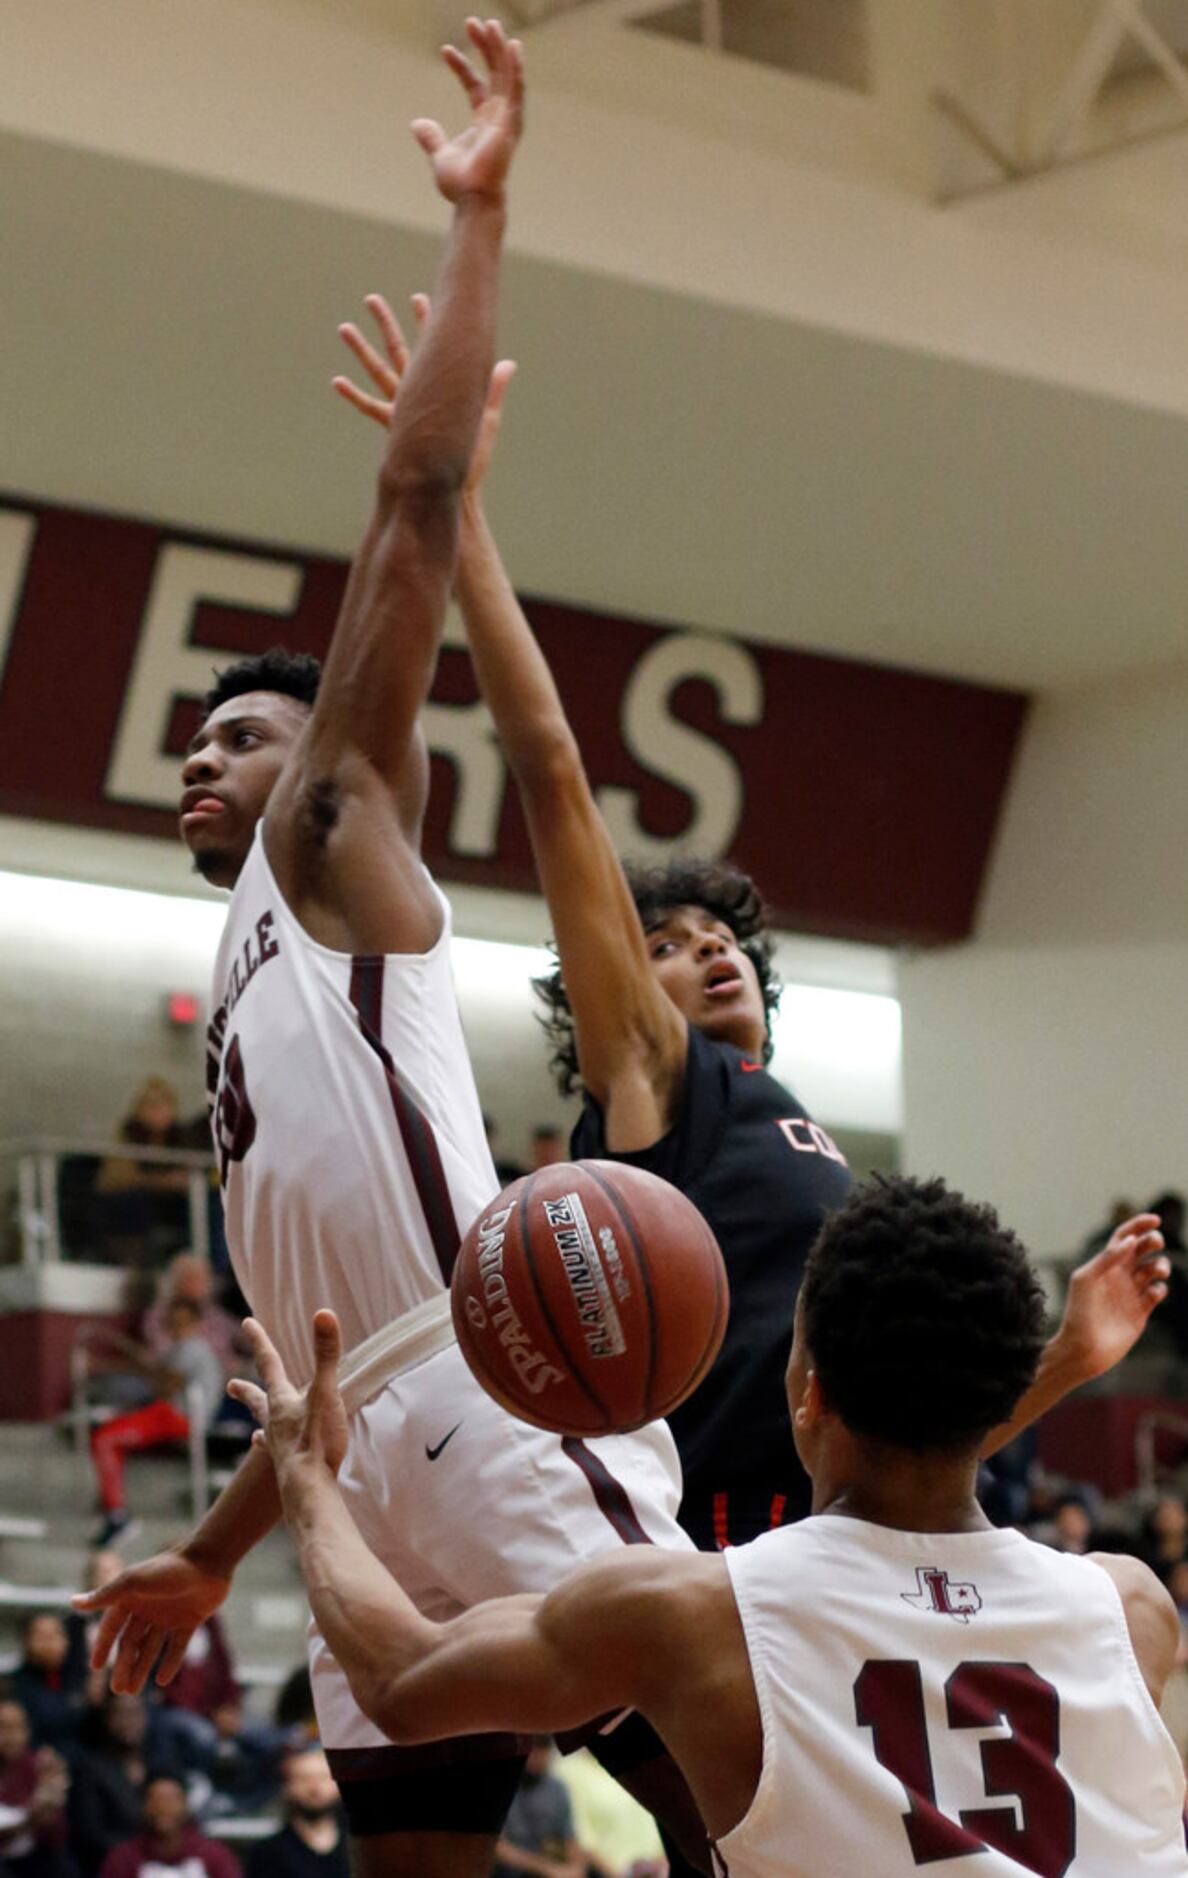 Lewisville's OC Girtmon (10) left, is fouled on his drive to the basket when Coppell's...